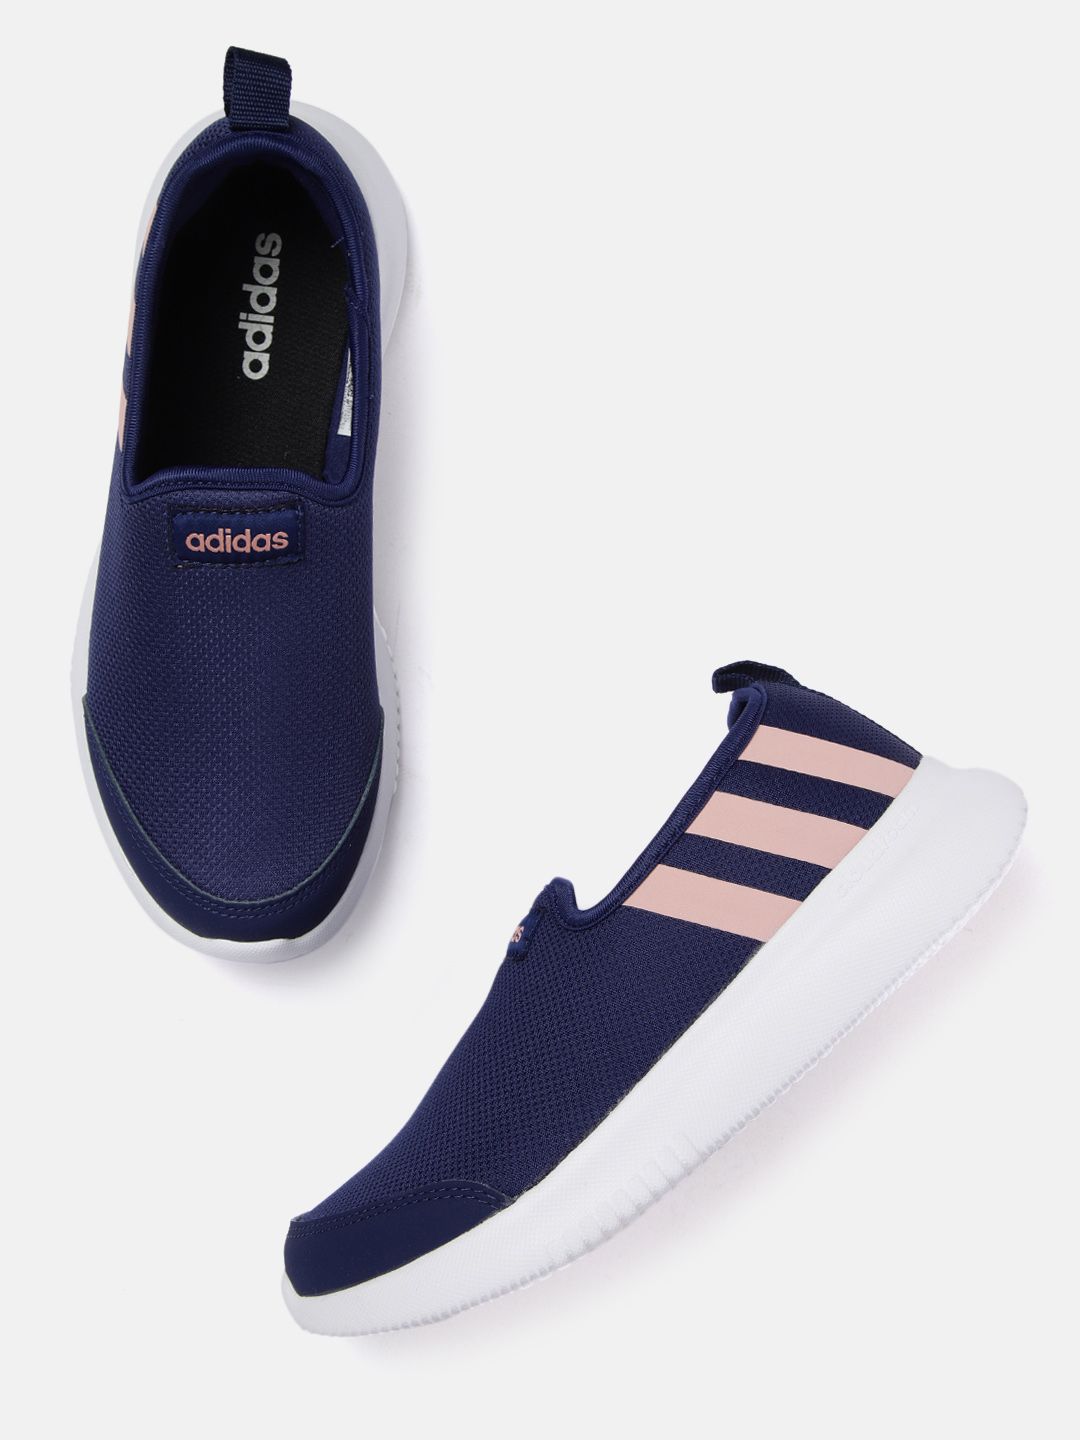 ADIDAS Women Navy Blue Woven Design Breeze Walking Shoes Price in India